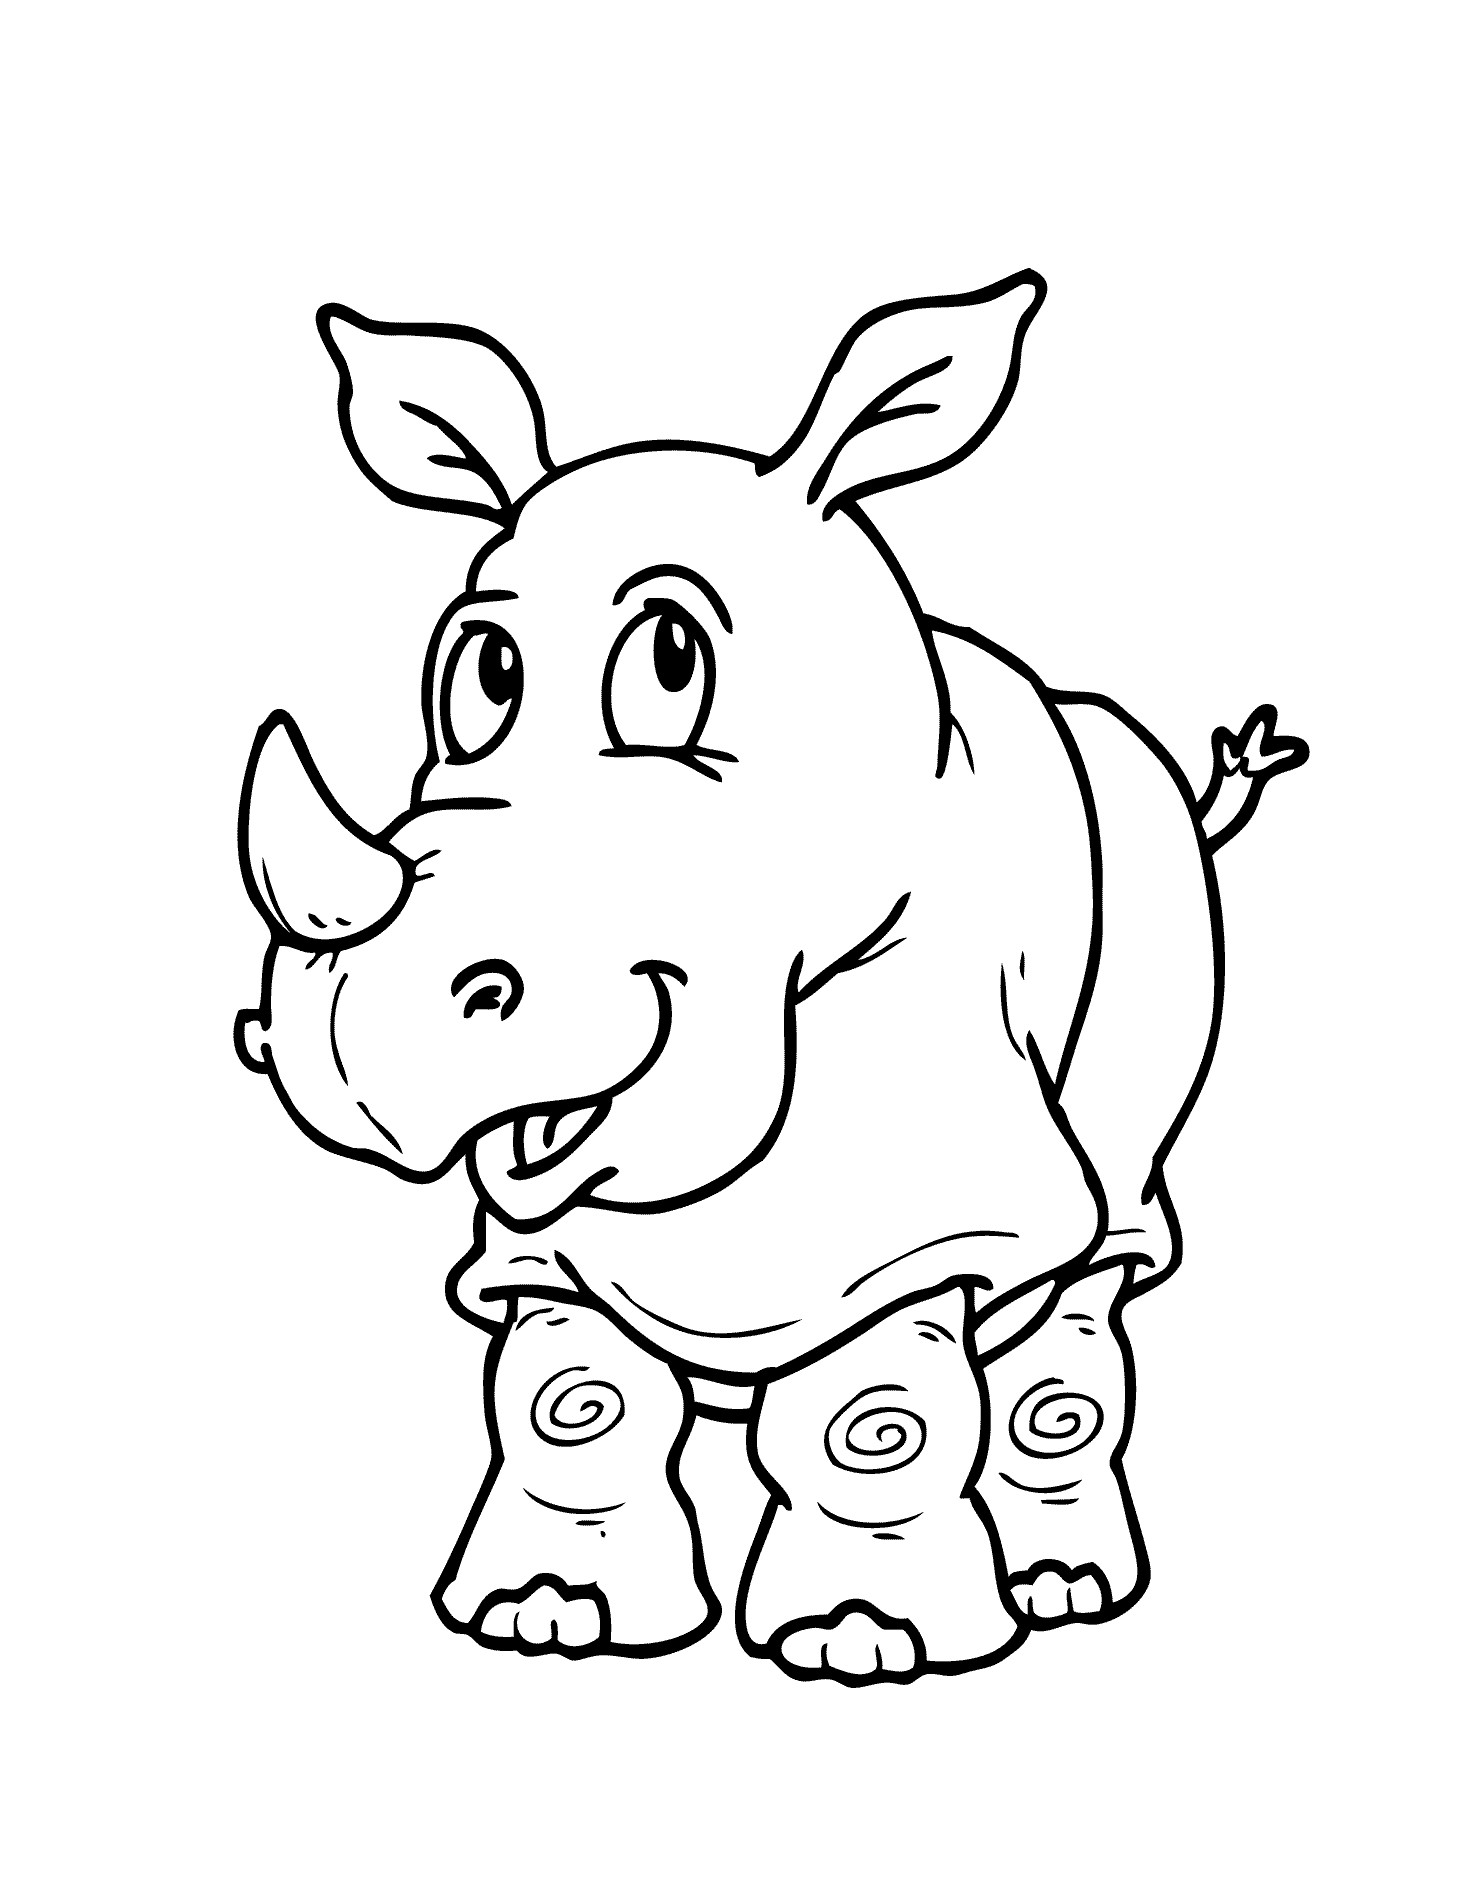 Printable Coloring Pages For Kids Animals
 Animal coloring sheets for kids Coloring pages for kids